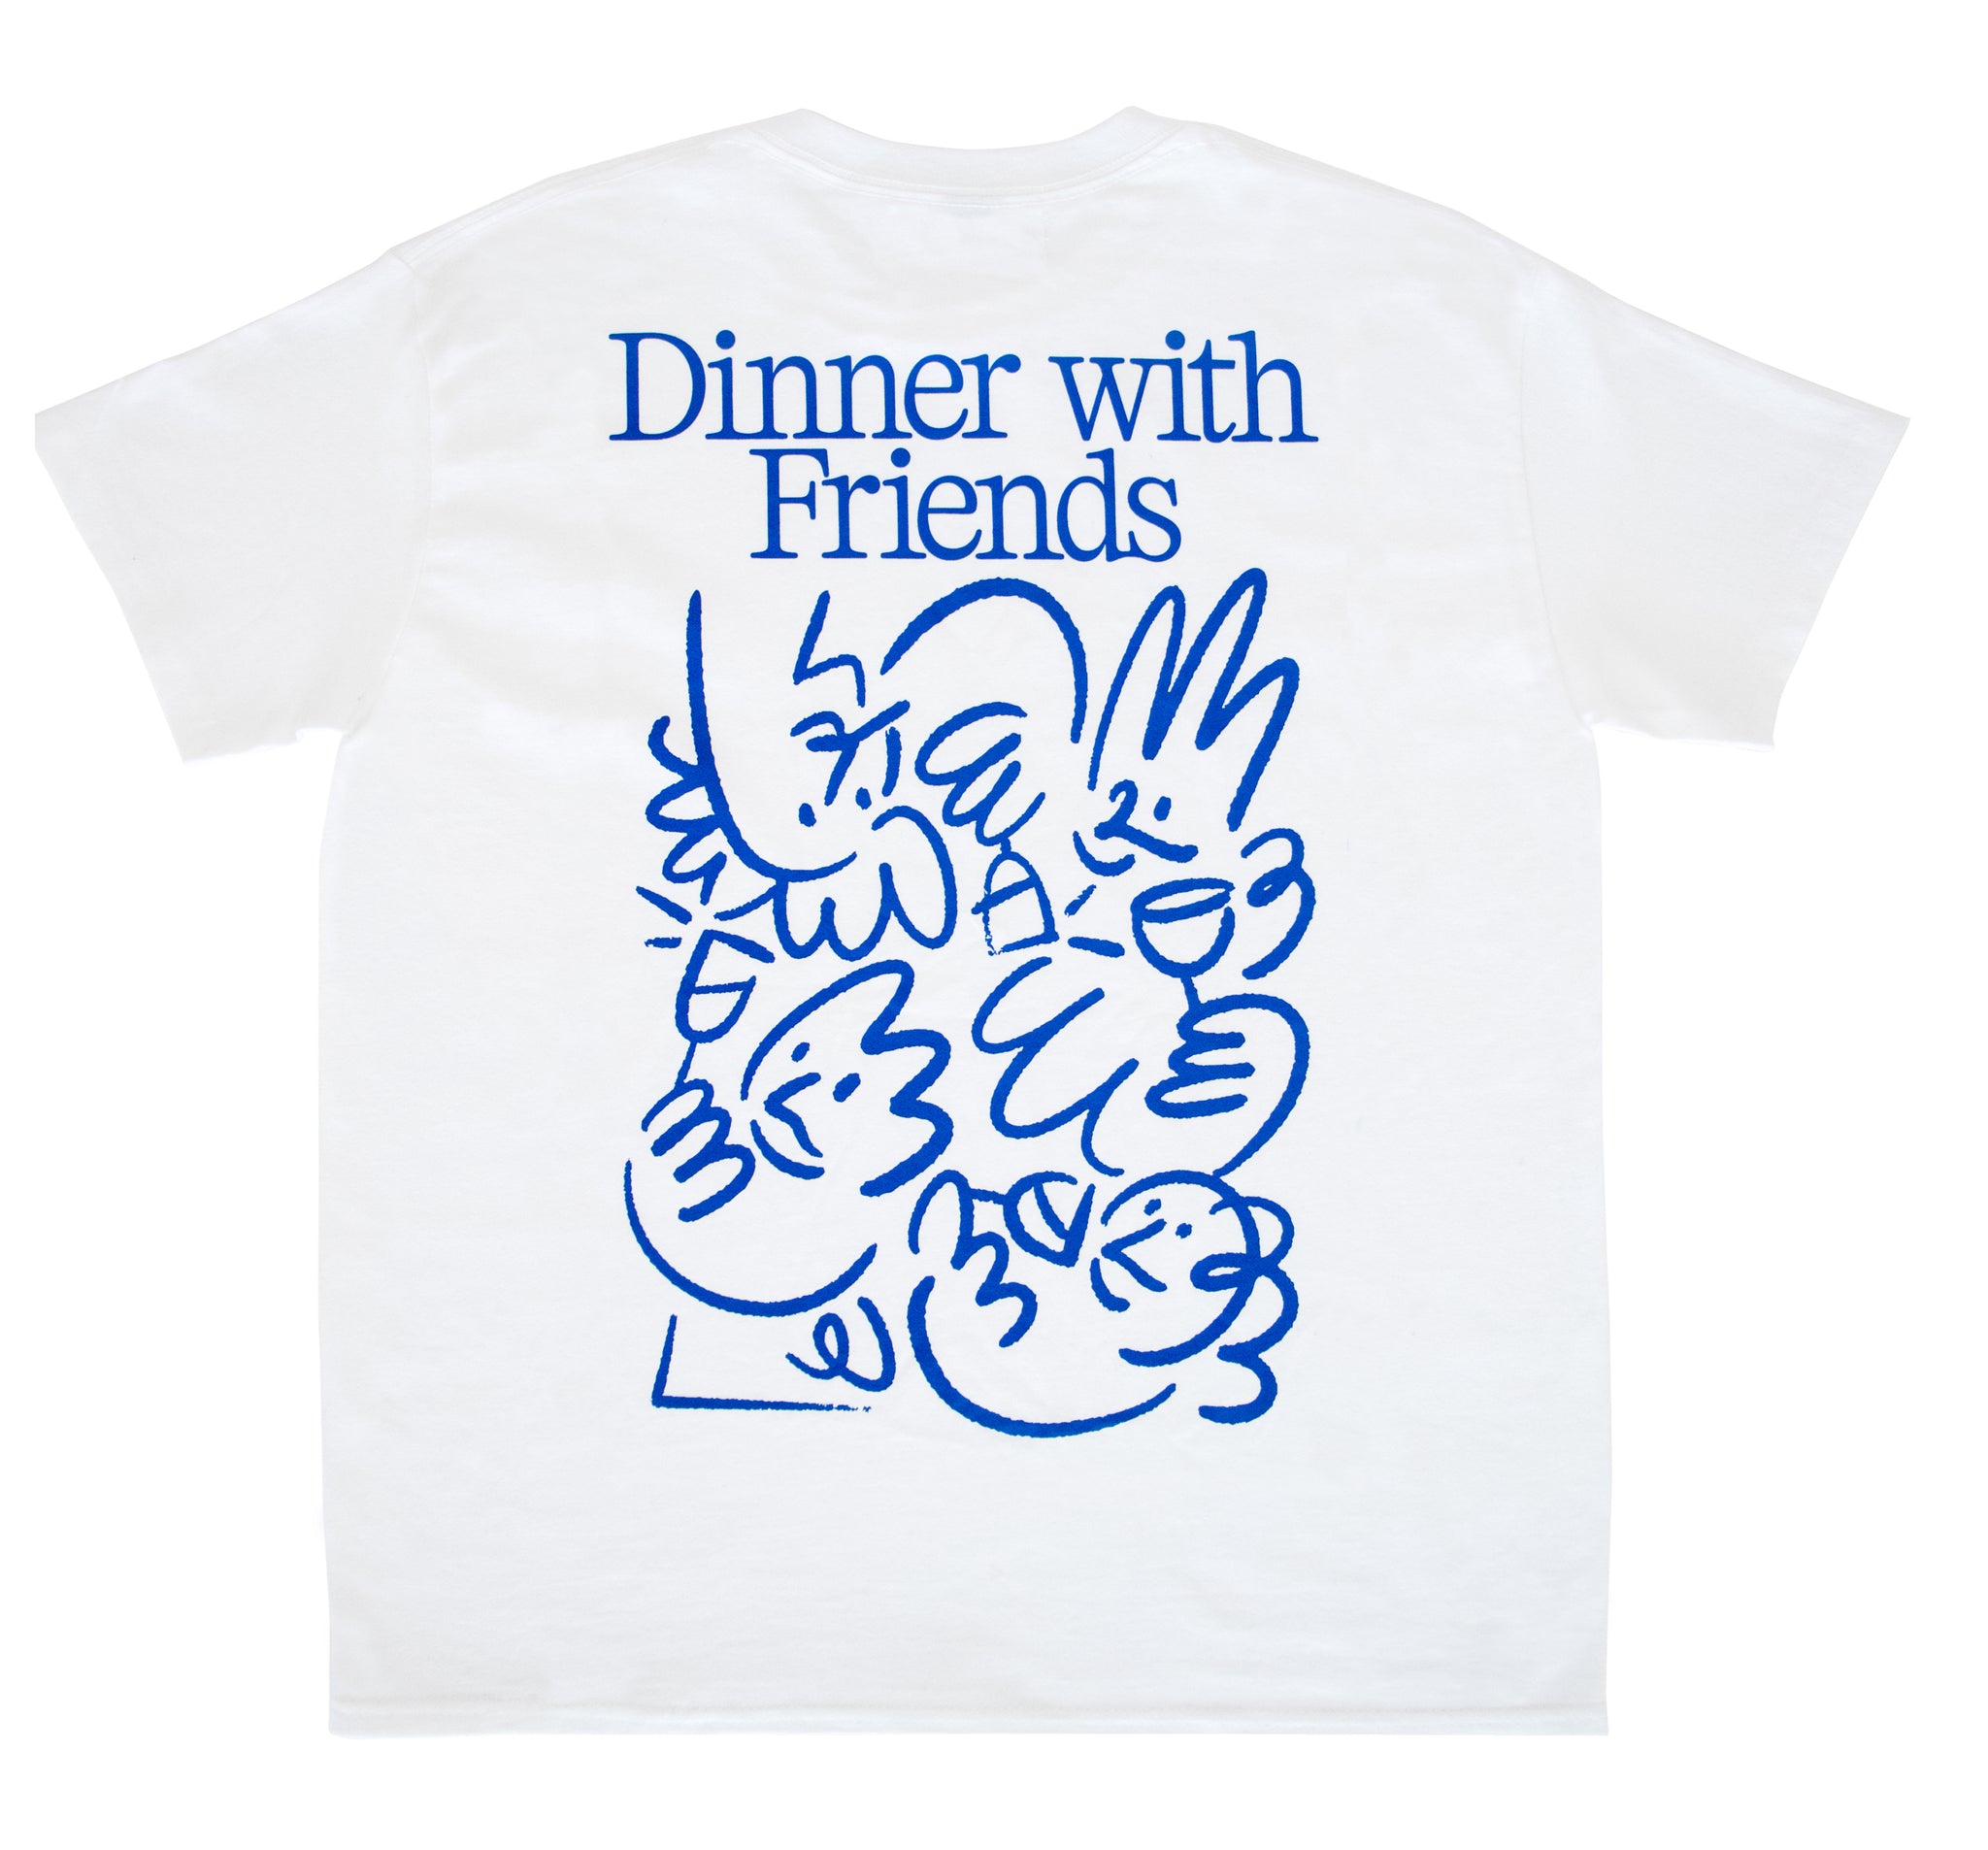 Dinner with Friends Tee